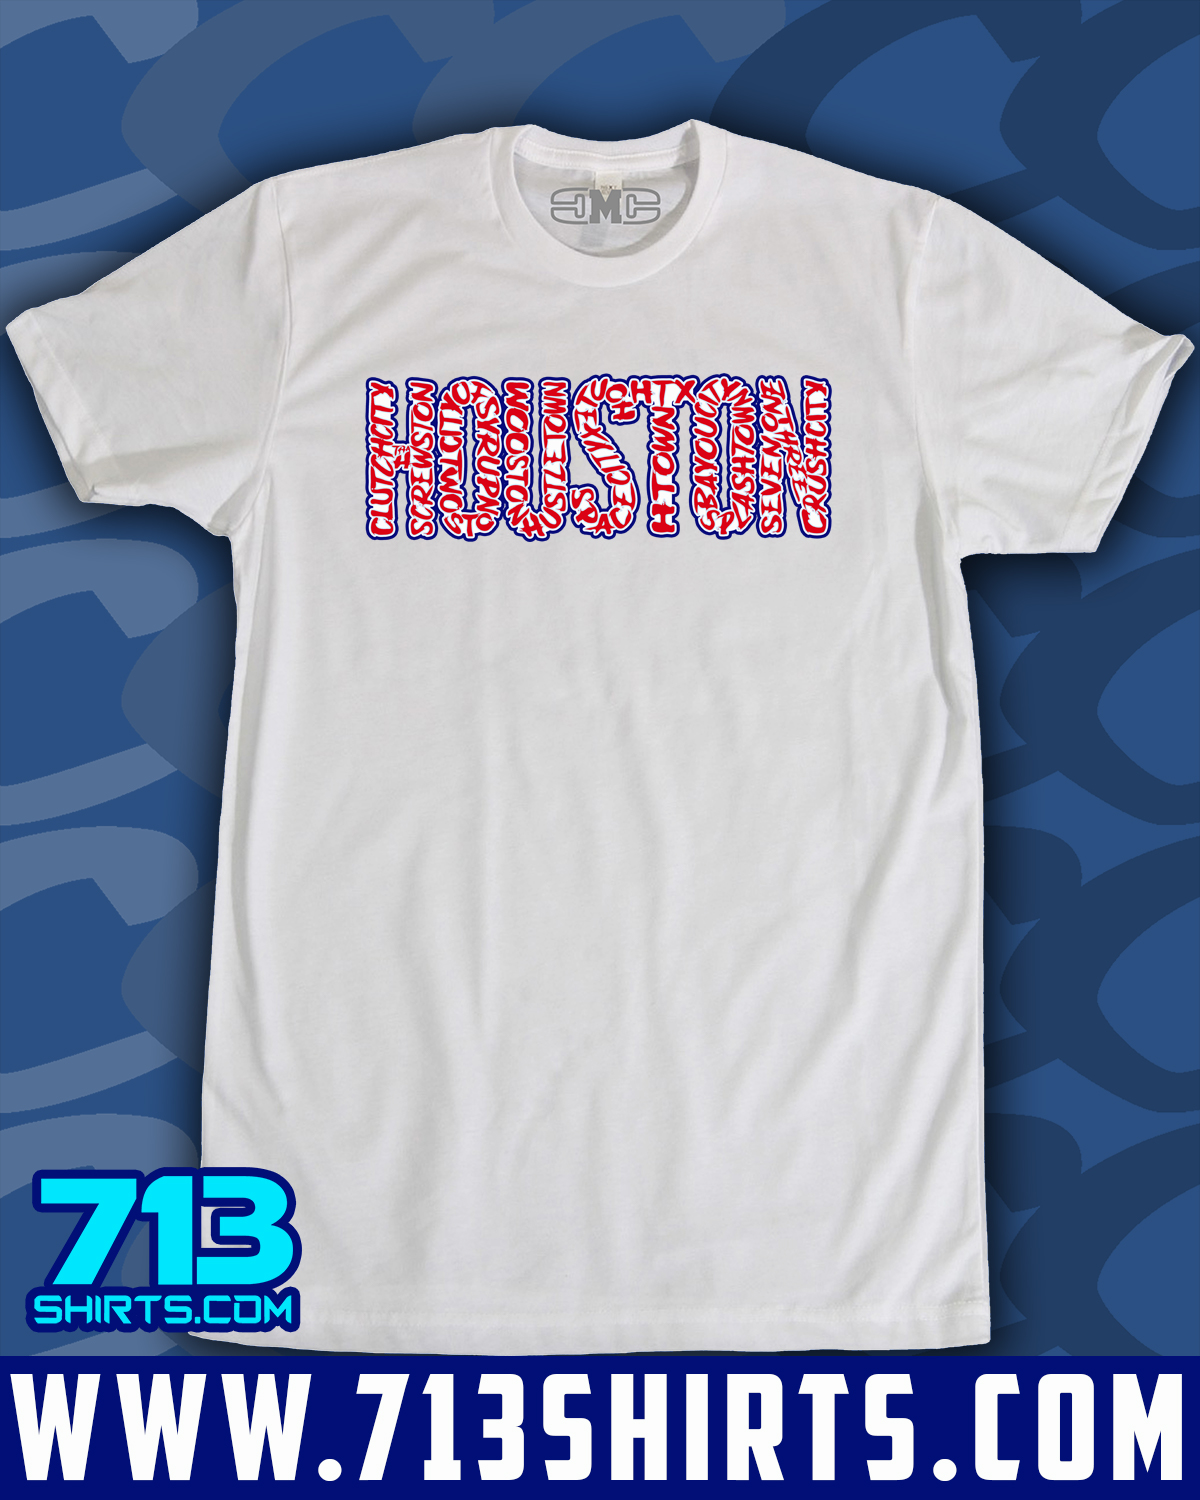 Hustle Town For The Astros T-Shirt, hoodie, sweater, long sleeve and tank  top